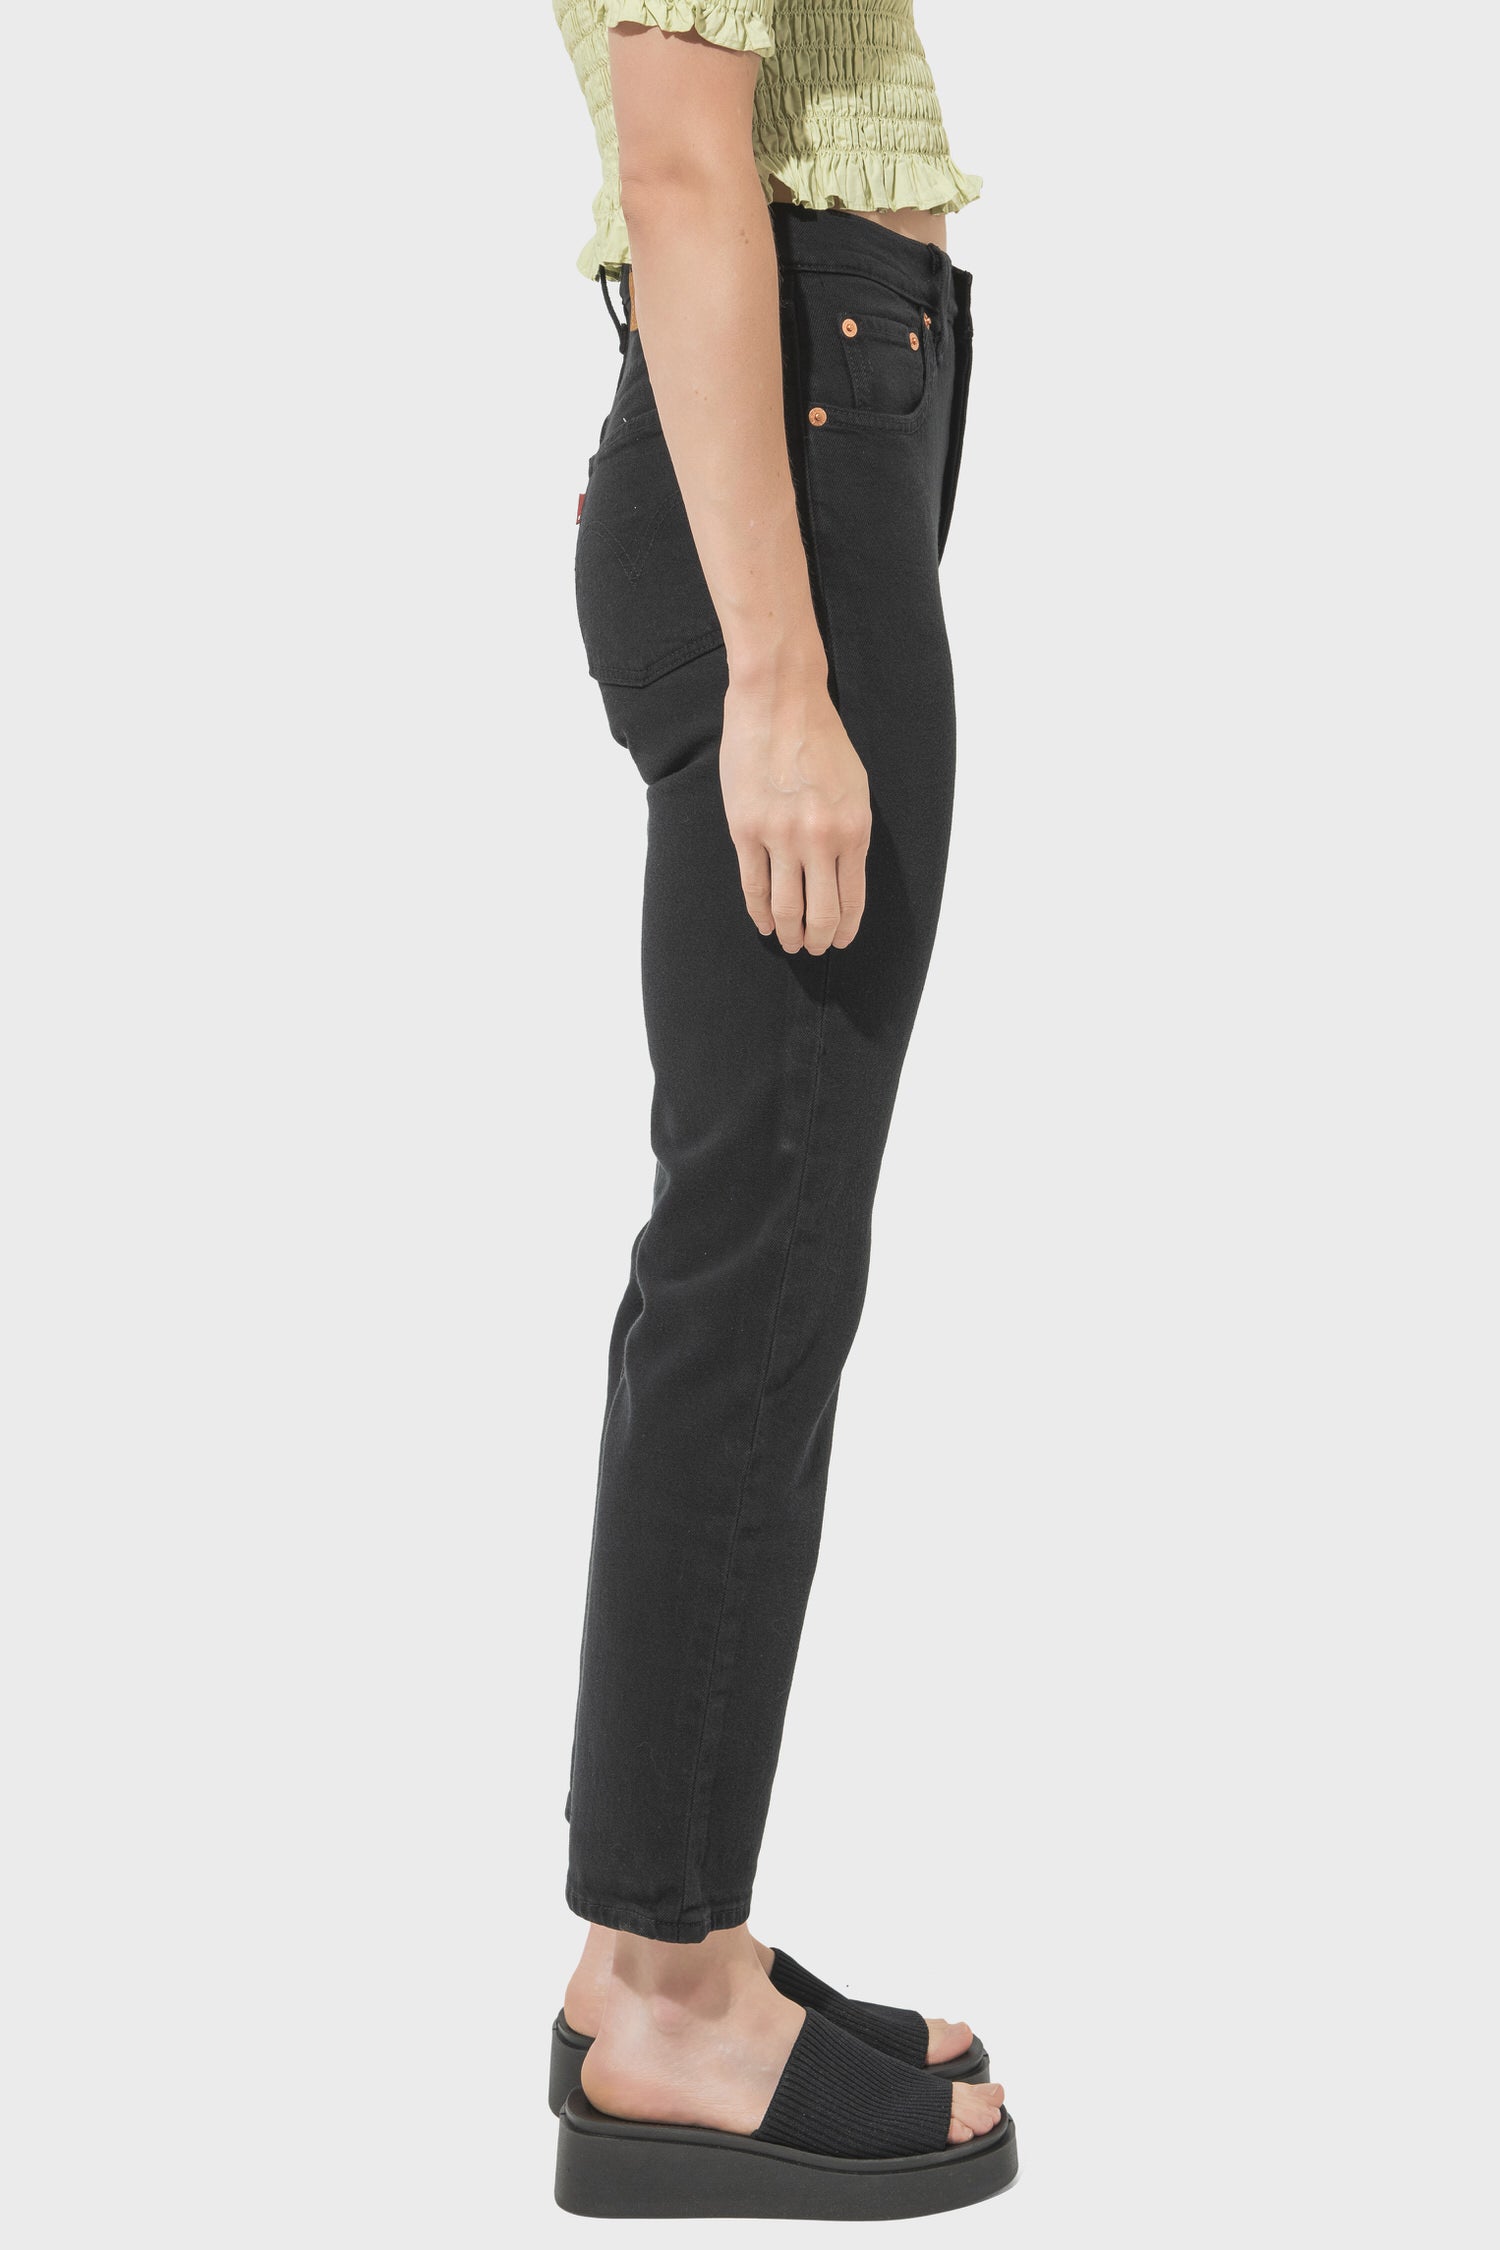 Women's Levi's 501 Crop in Black Sprout